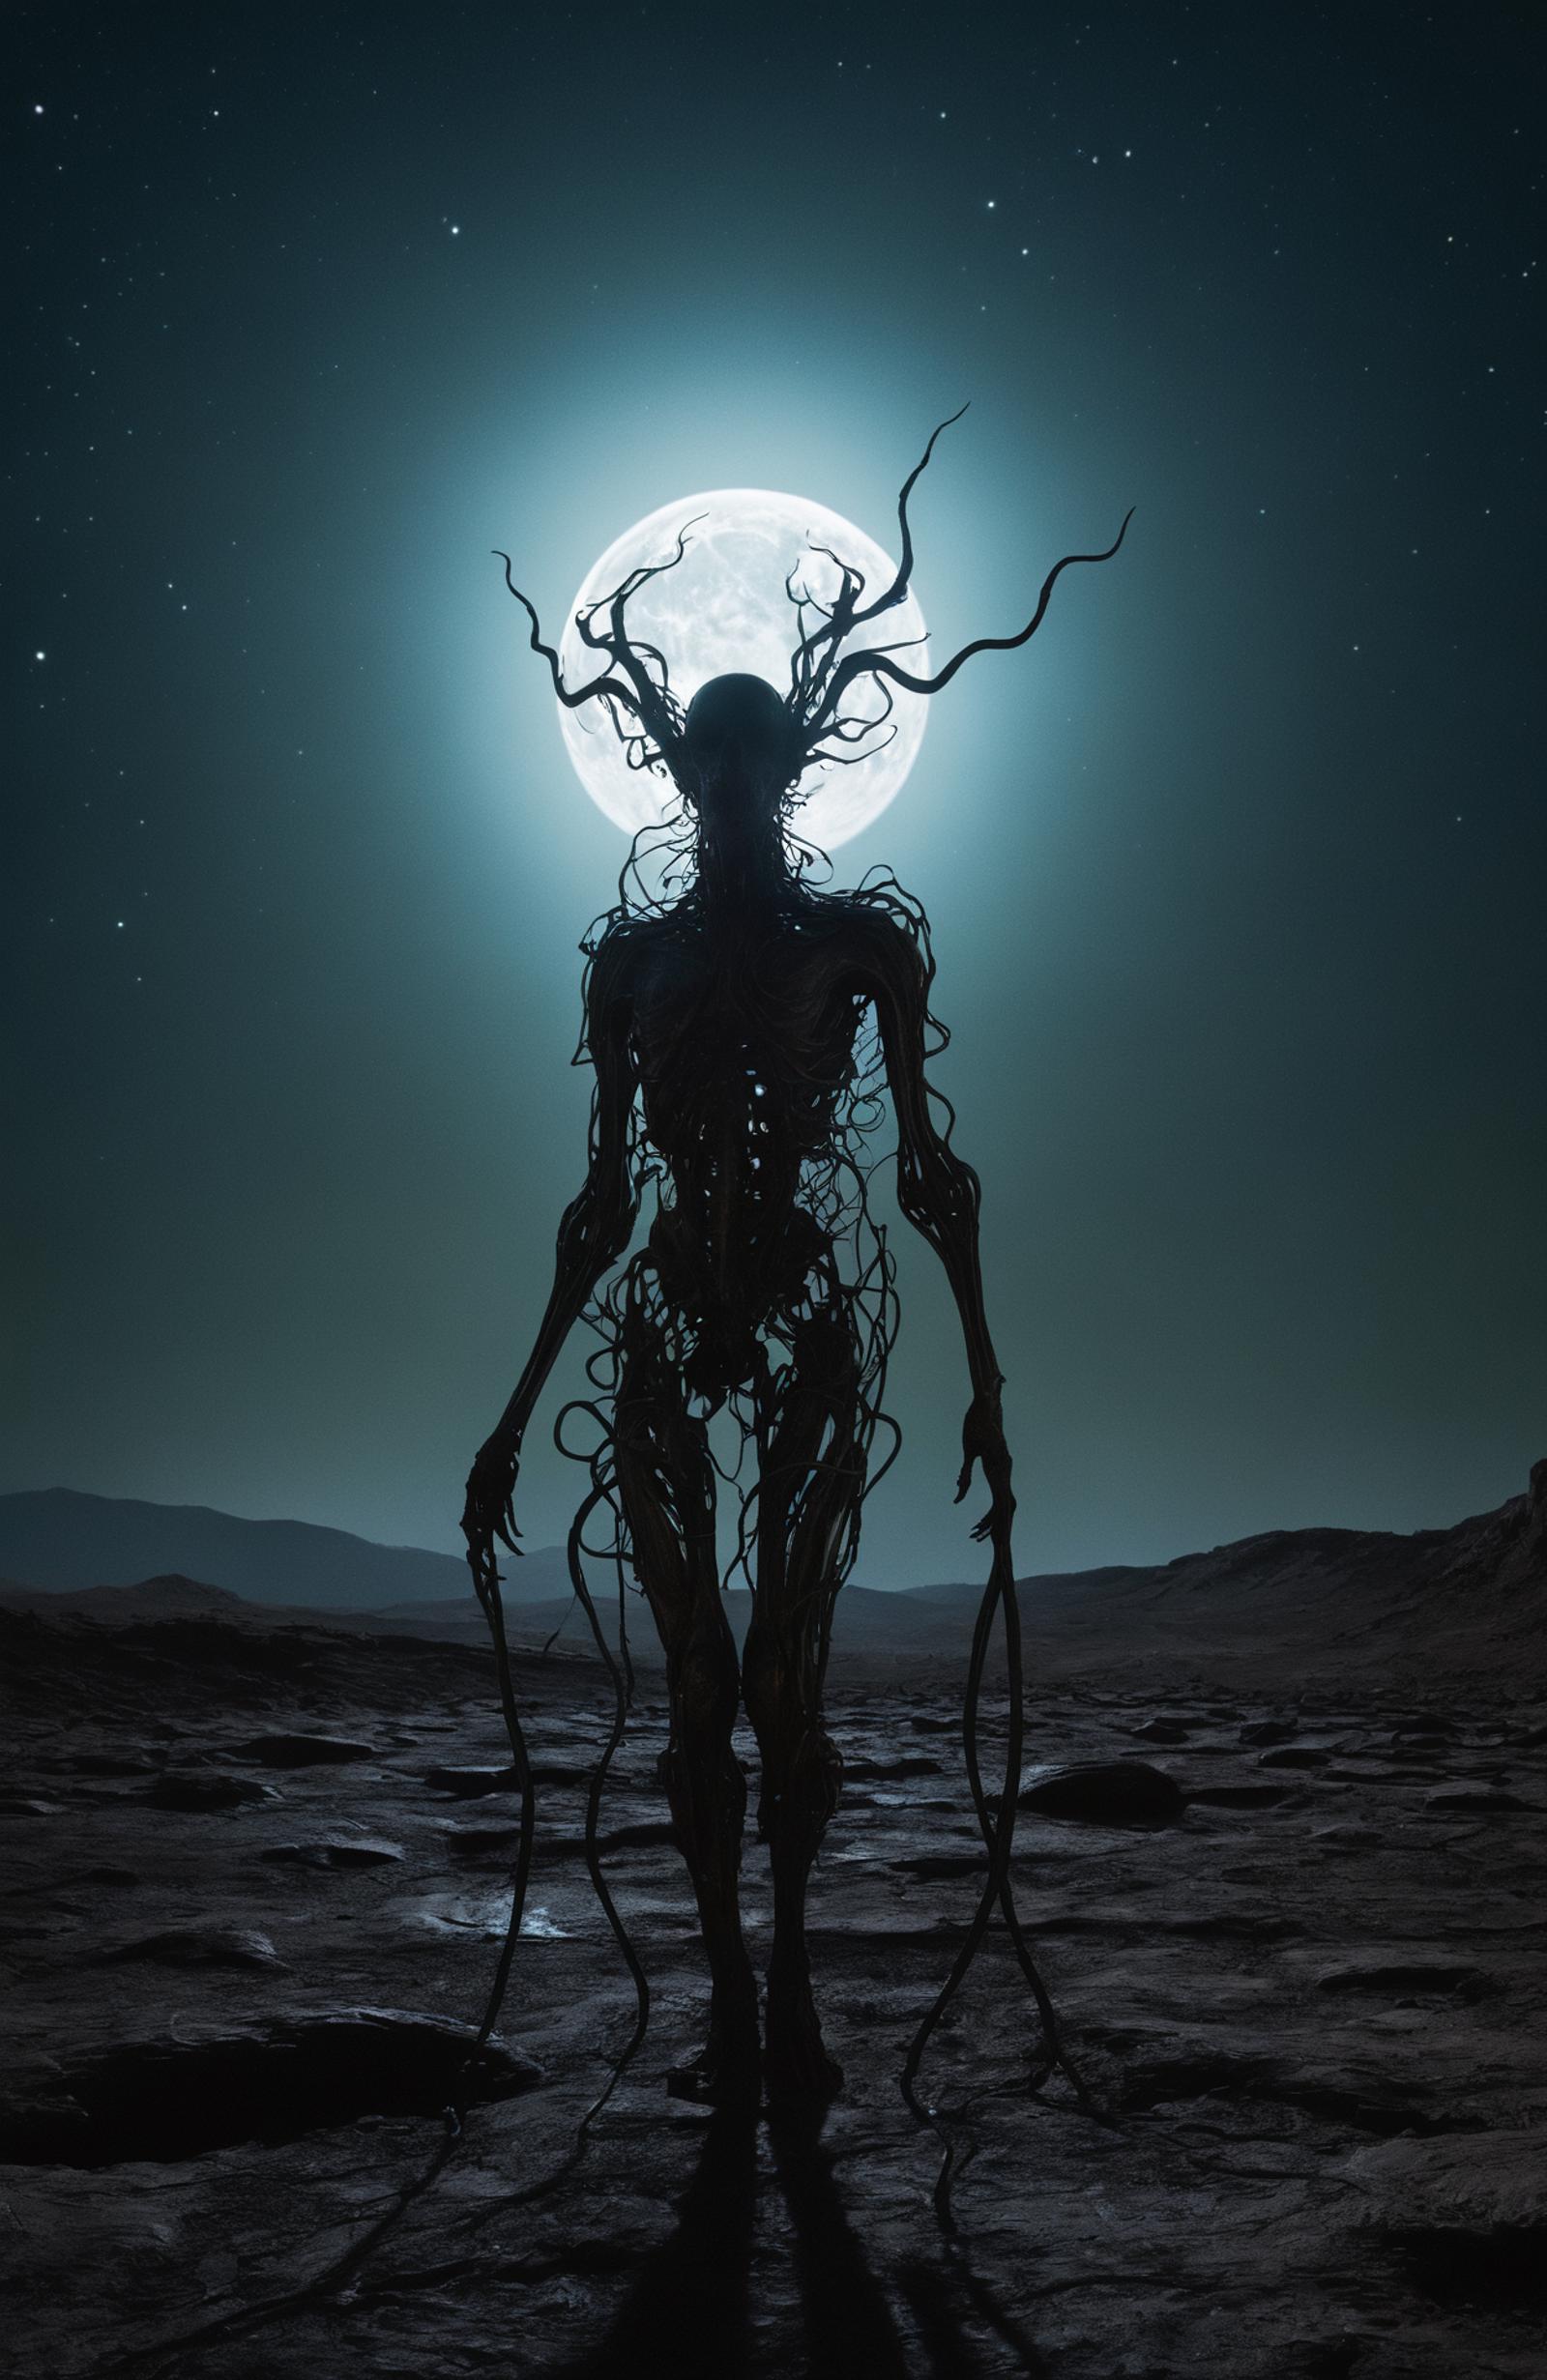 A Moonlit Scene of a Tree-like Skeleton Figure with Long Chains and Roots